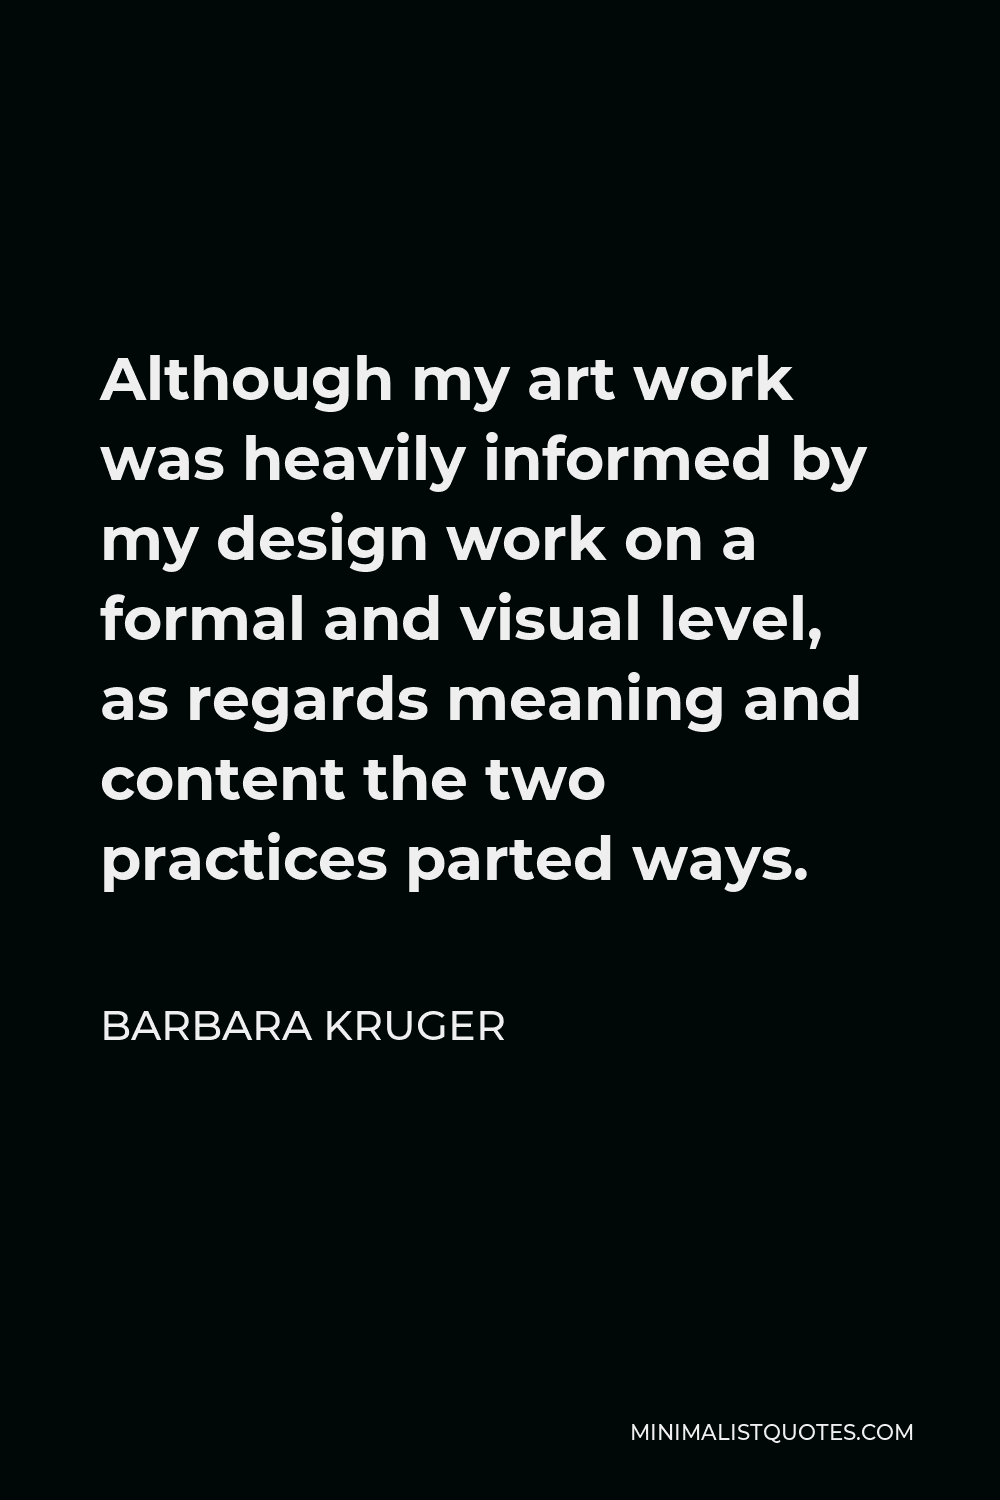 Barbara Kruger Quote - Although my art work was heavily informed by my design work on a formal and visual level, as regards meaning and content the two practices parted ways.